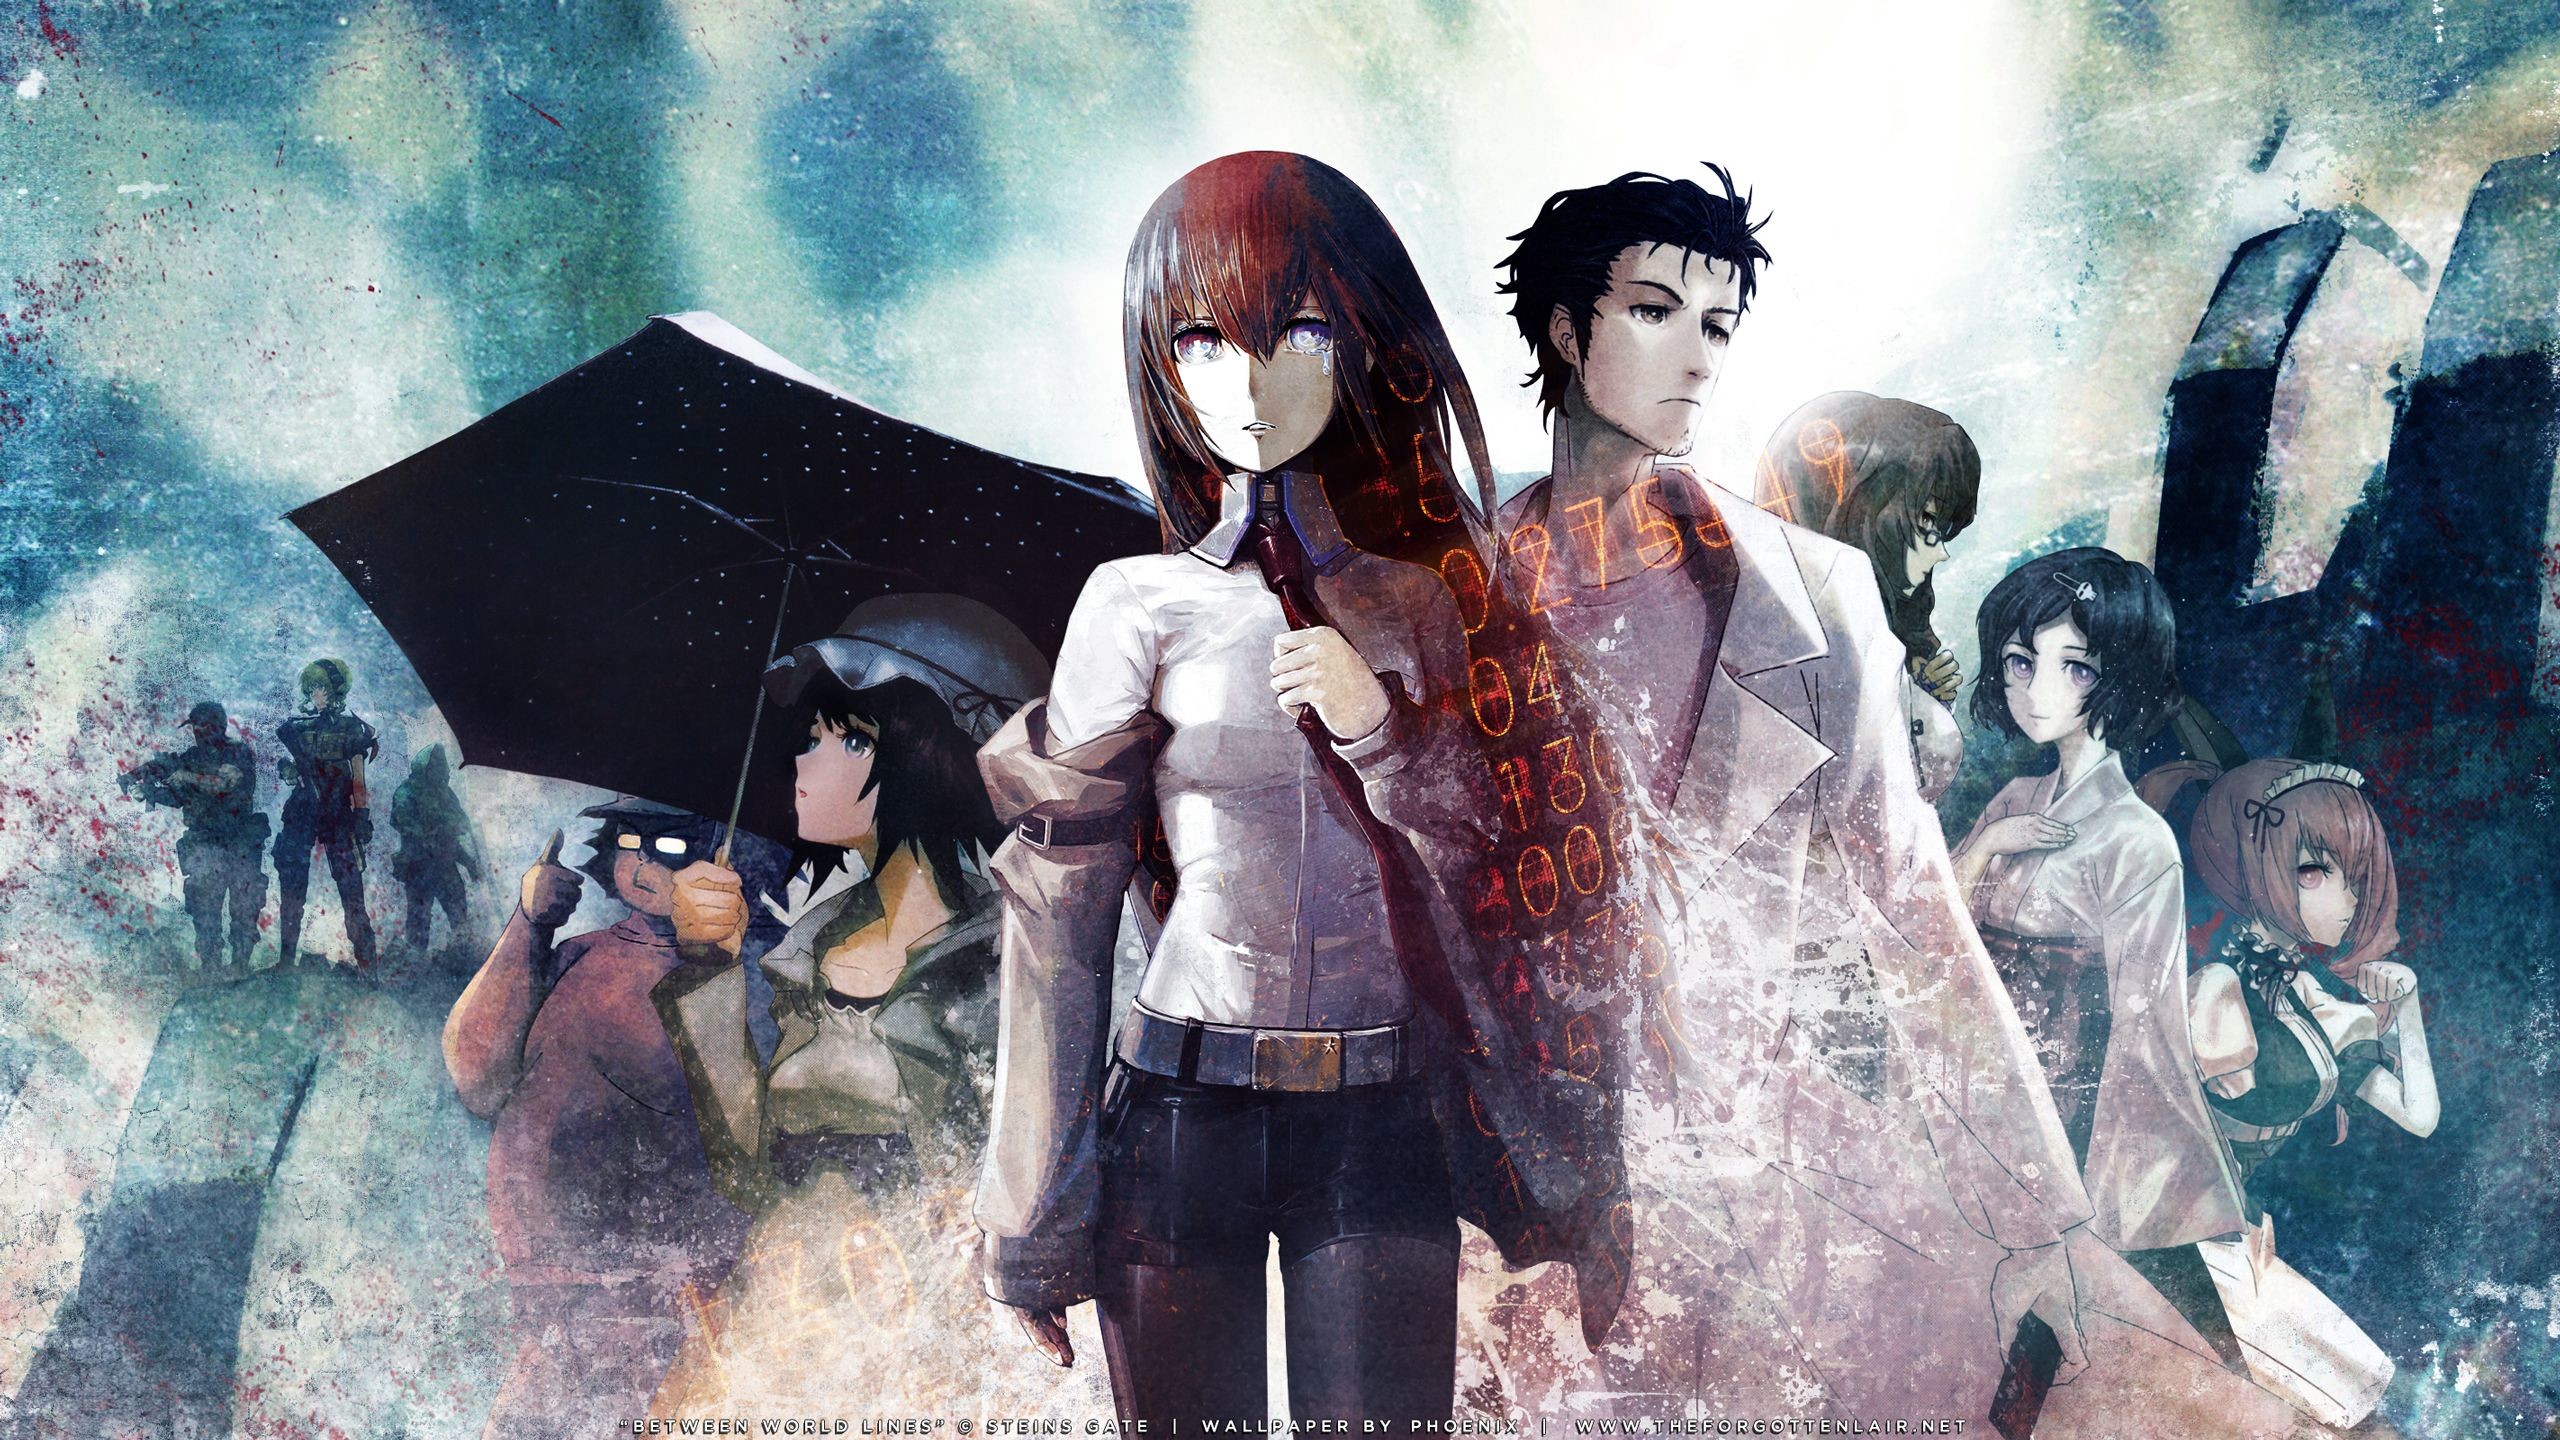 2560x1440 Image result for steins gate wallpaper | El Psy Congroo .